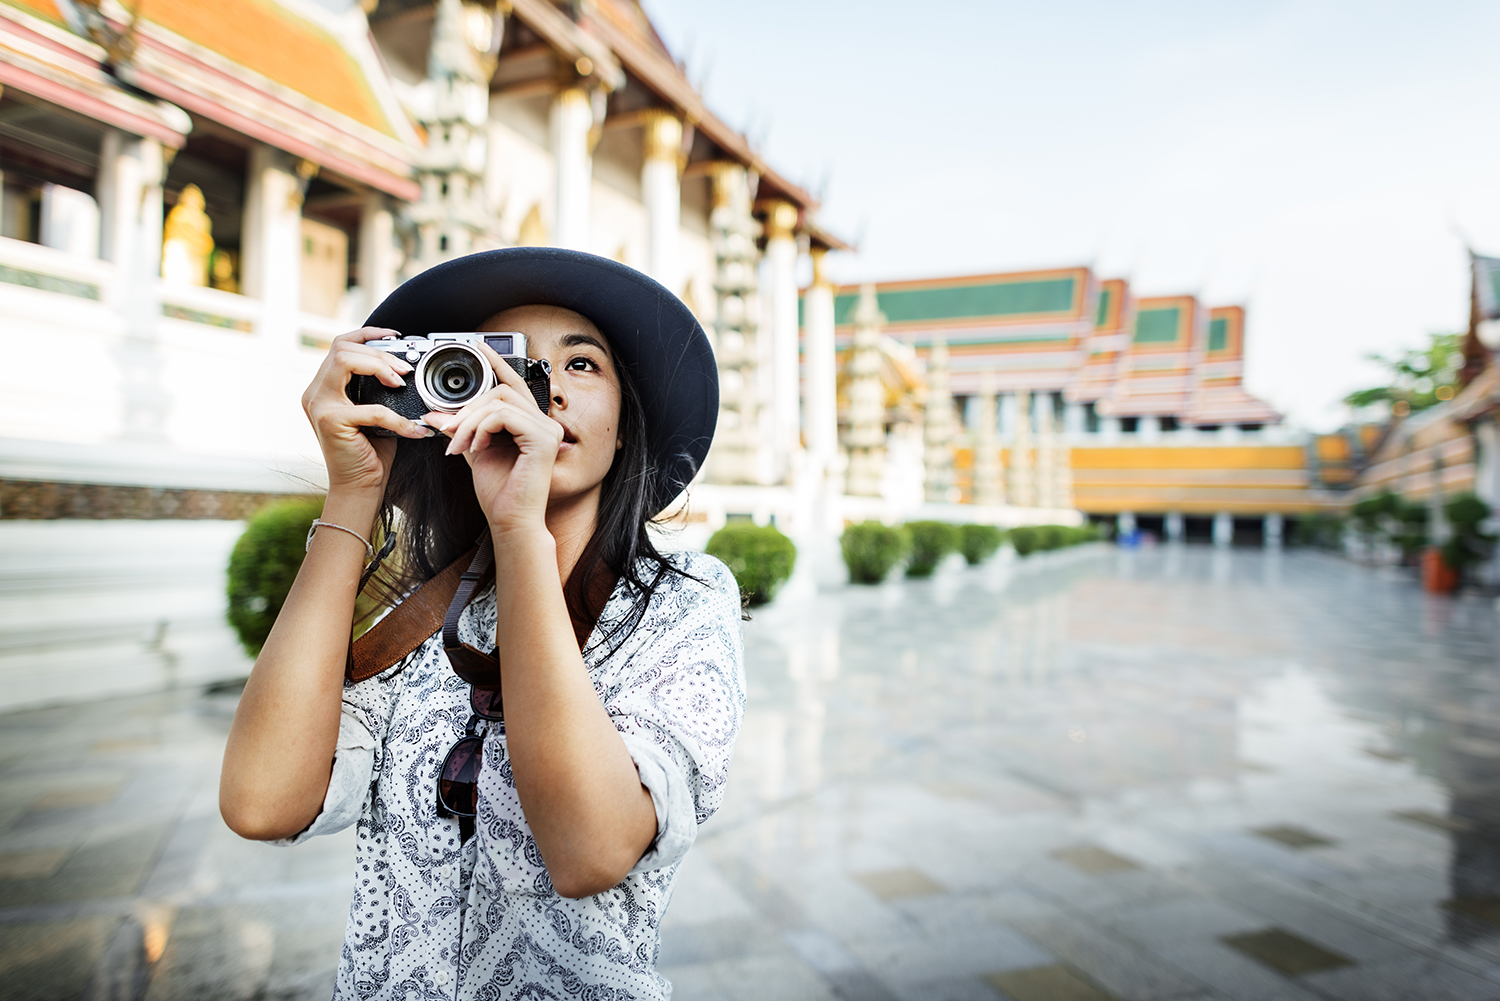 Photographer Travel Sightseeing Wander Hobby Recreation Concept